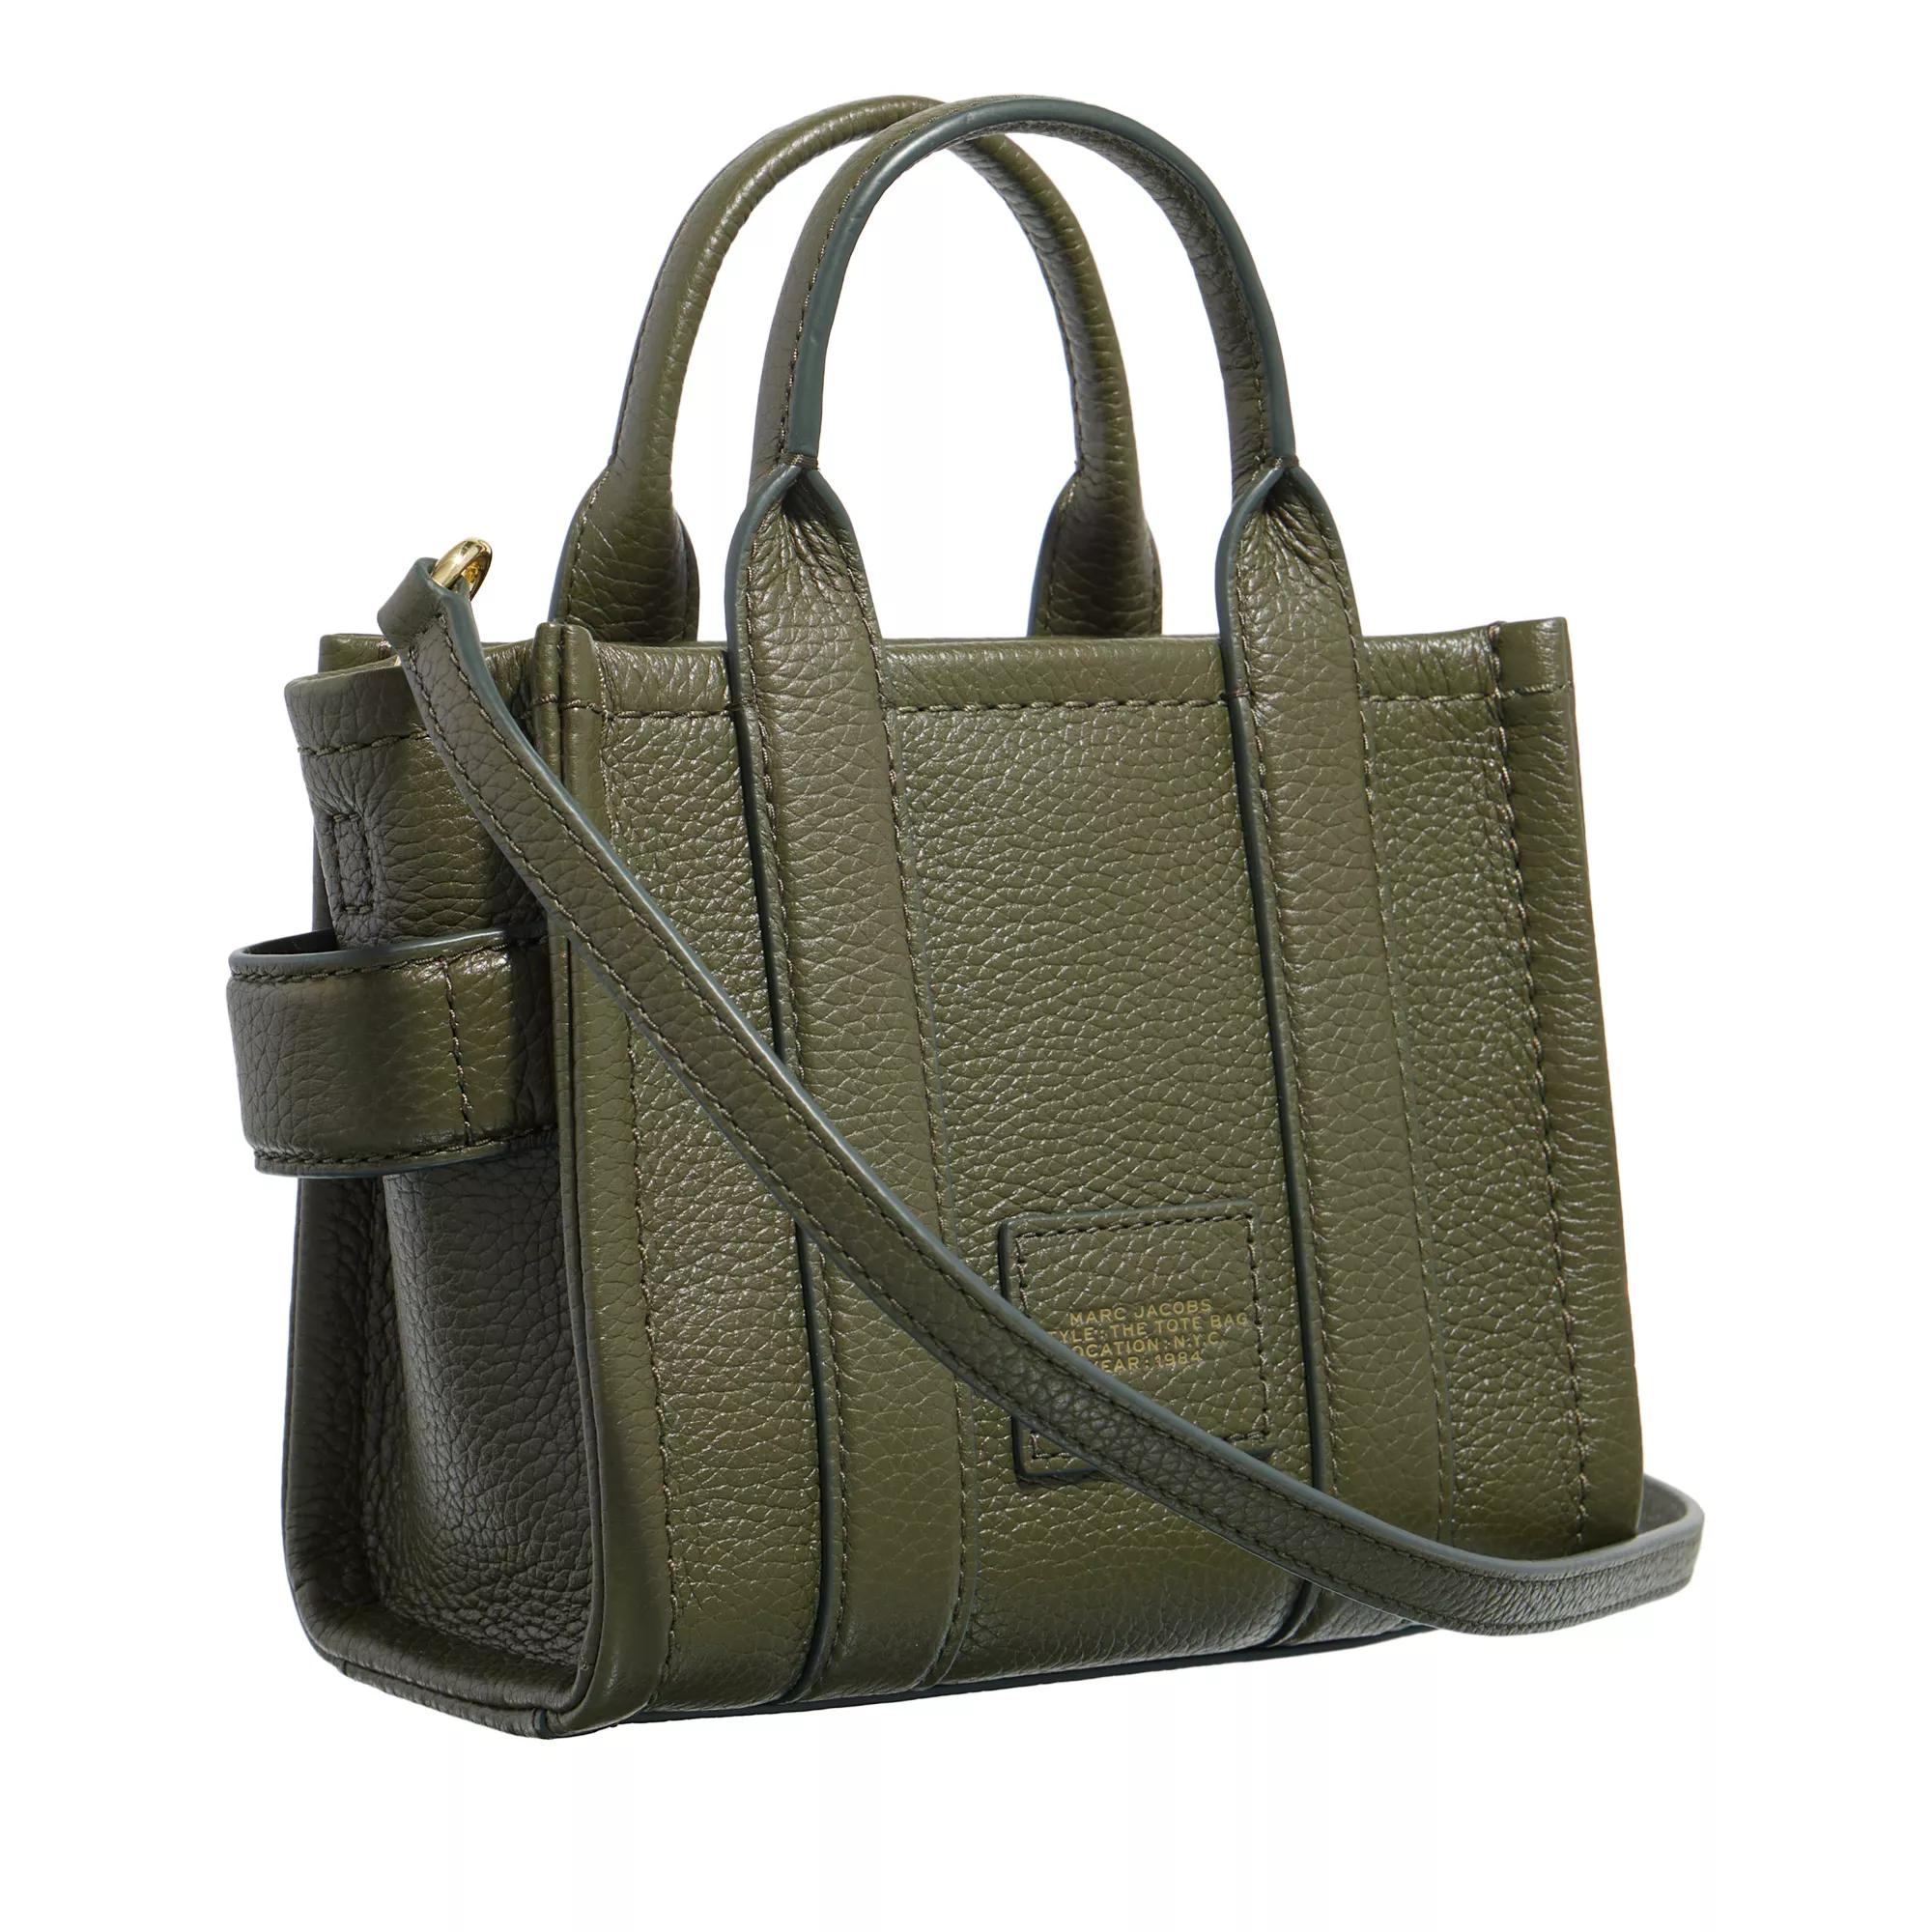 Marc Jacobs Totes Mini Tote Bag in groen